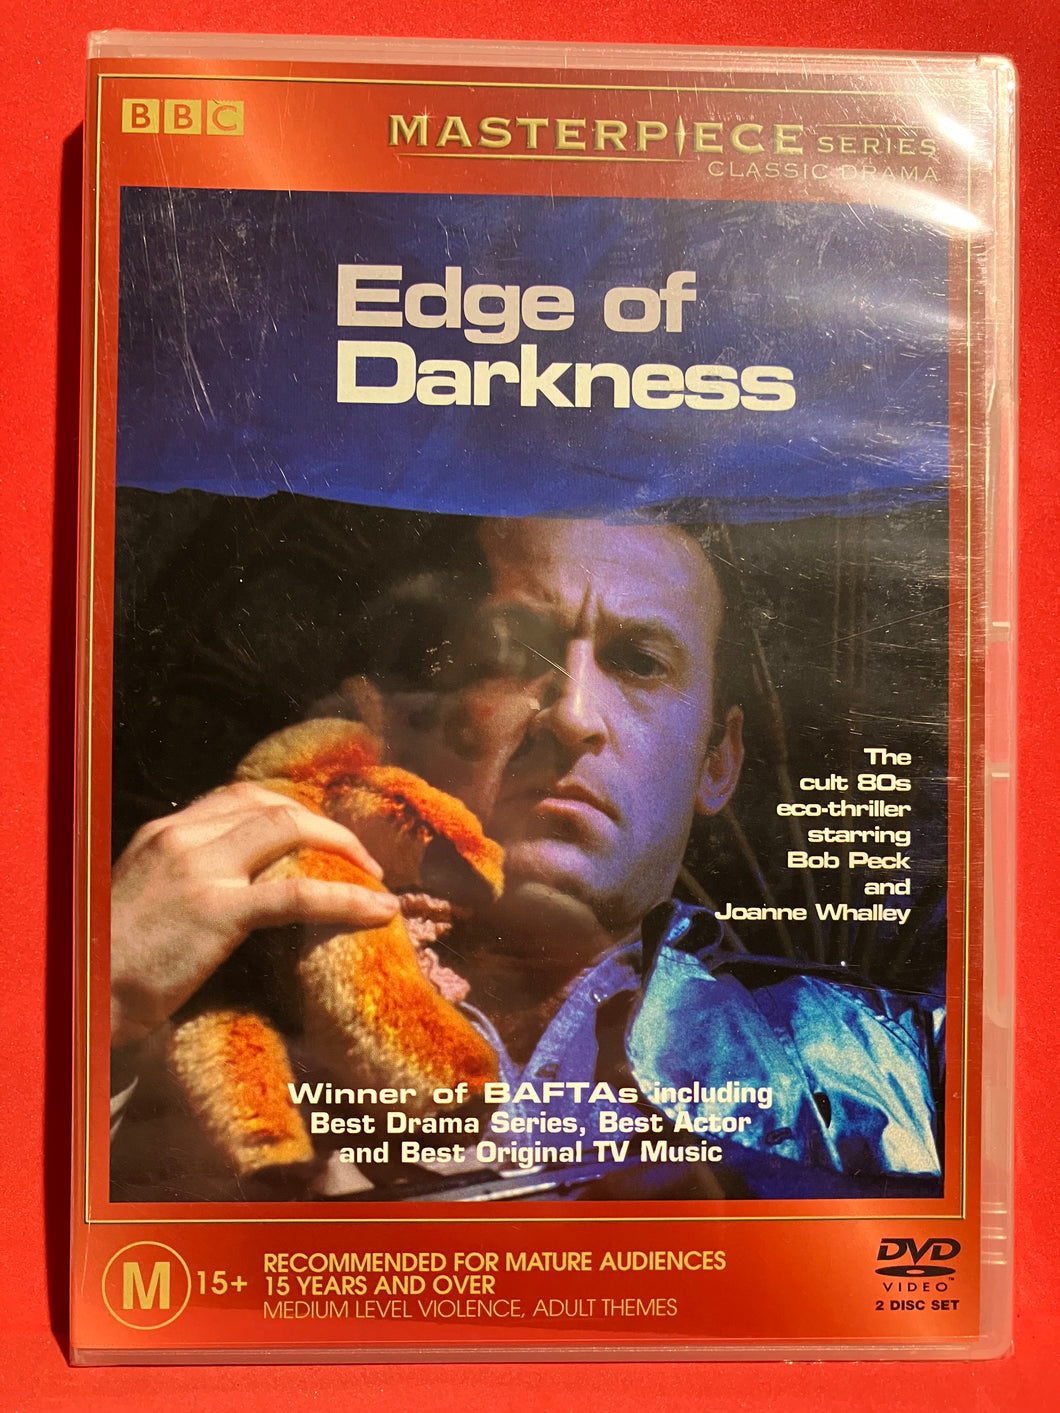 EDGE OF DARKNESS - DVD (SEALED)